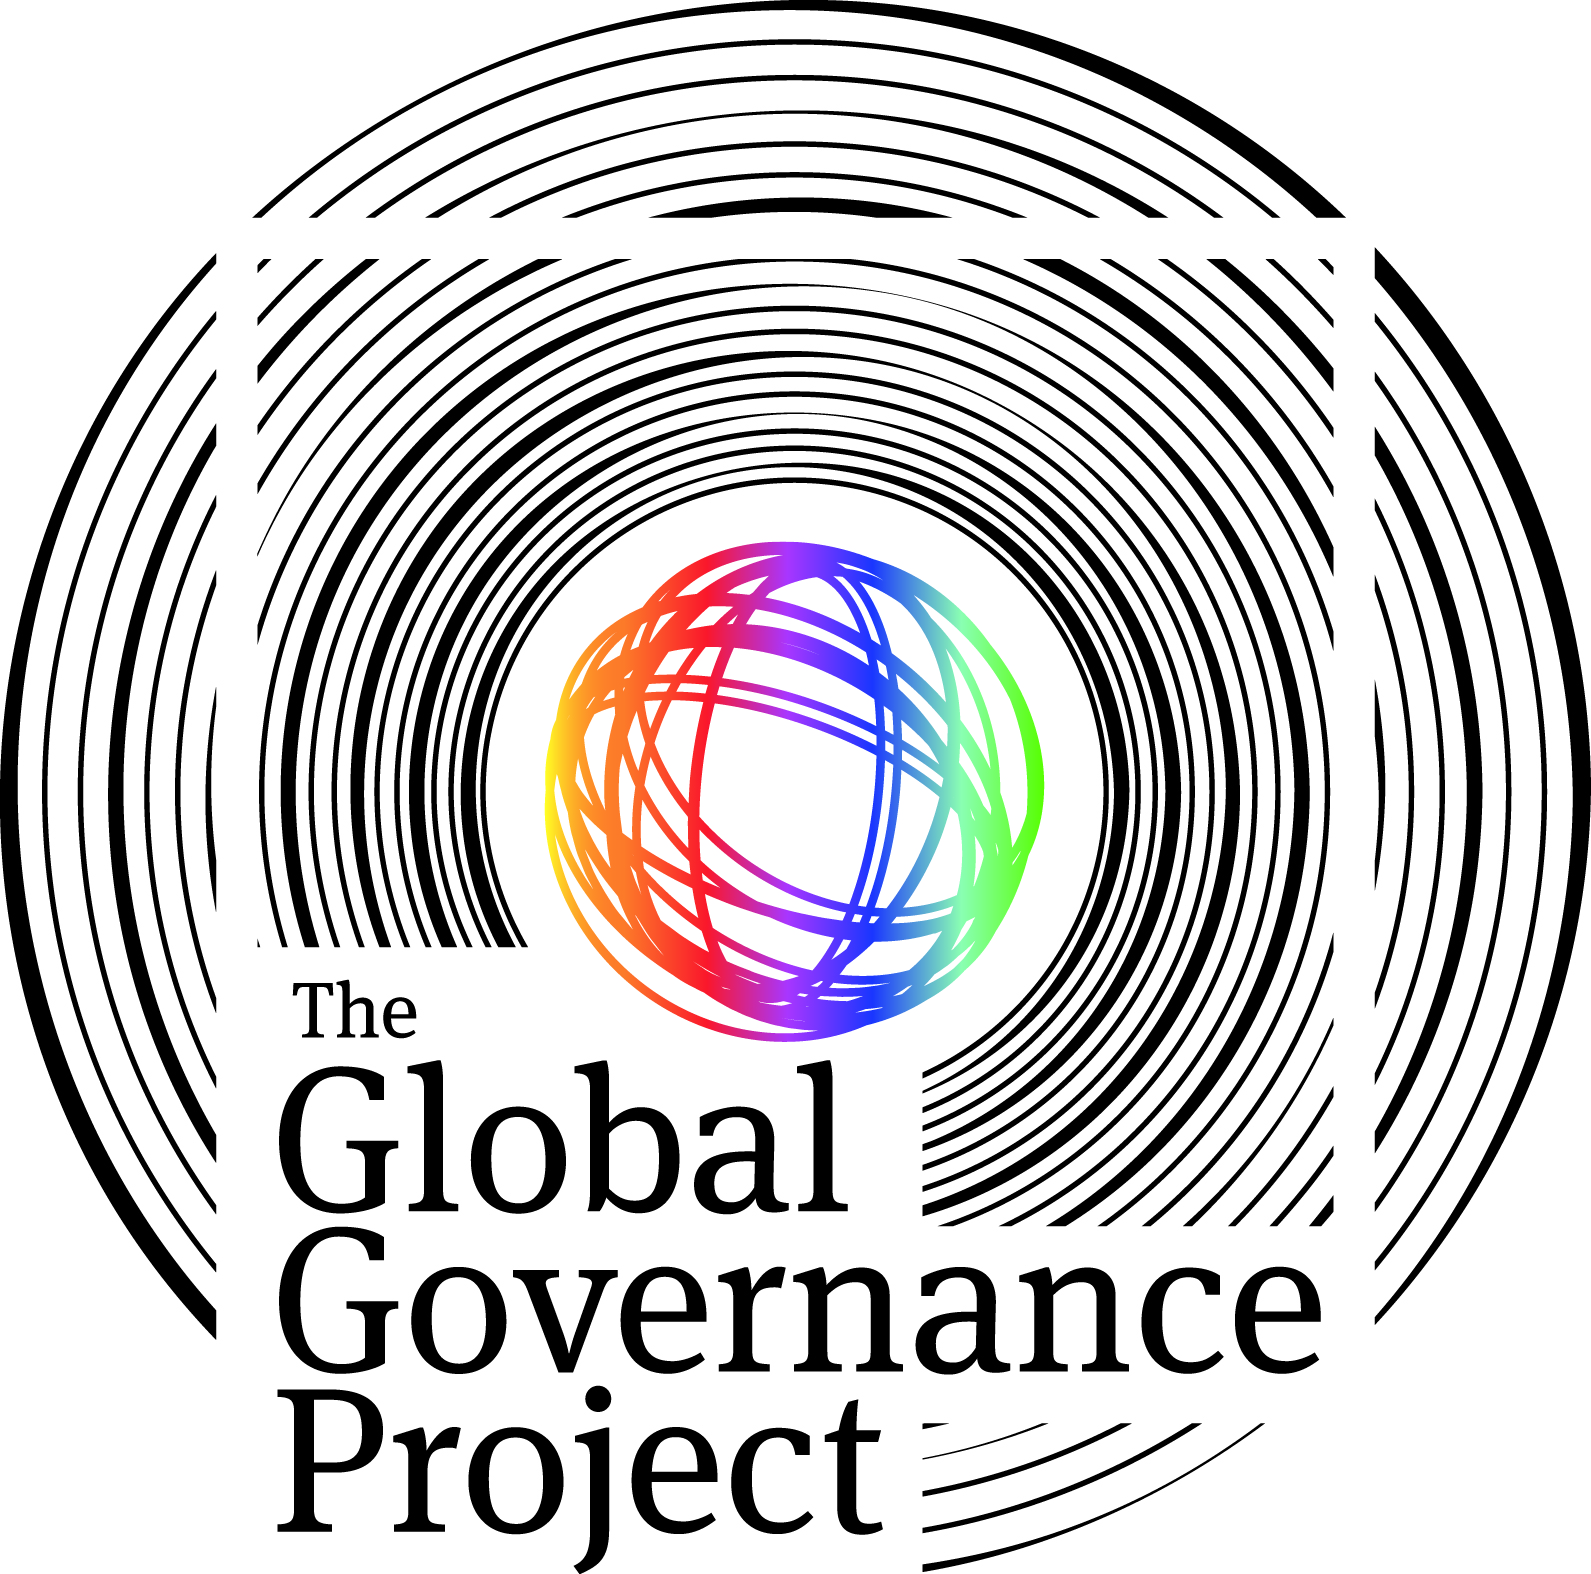 The Global Governance Project